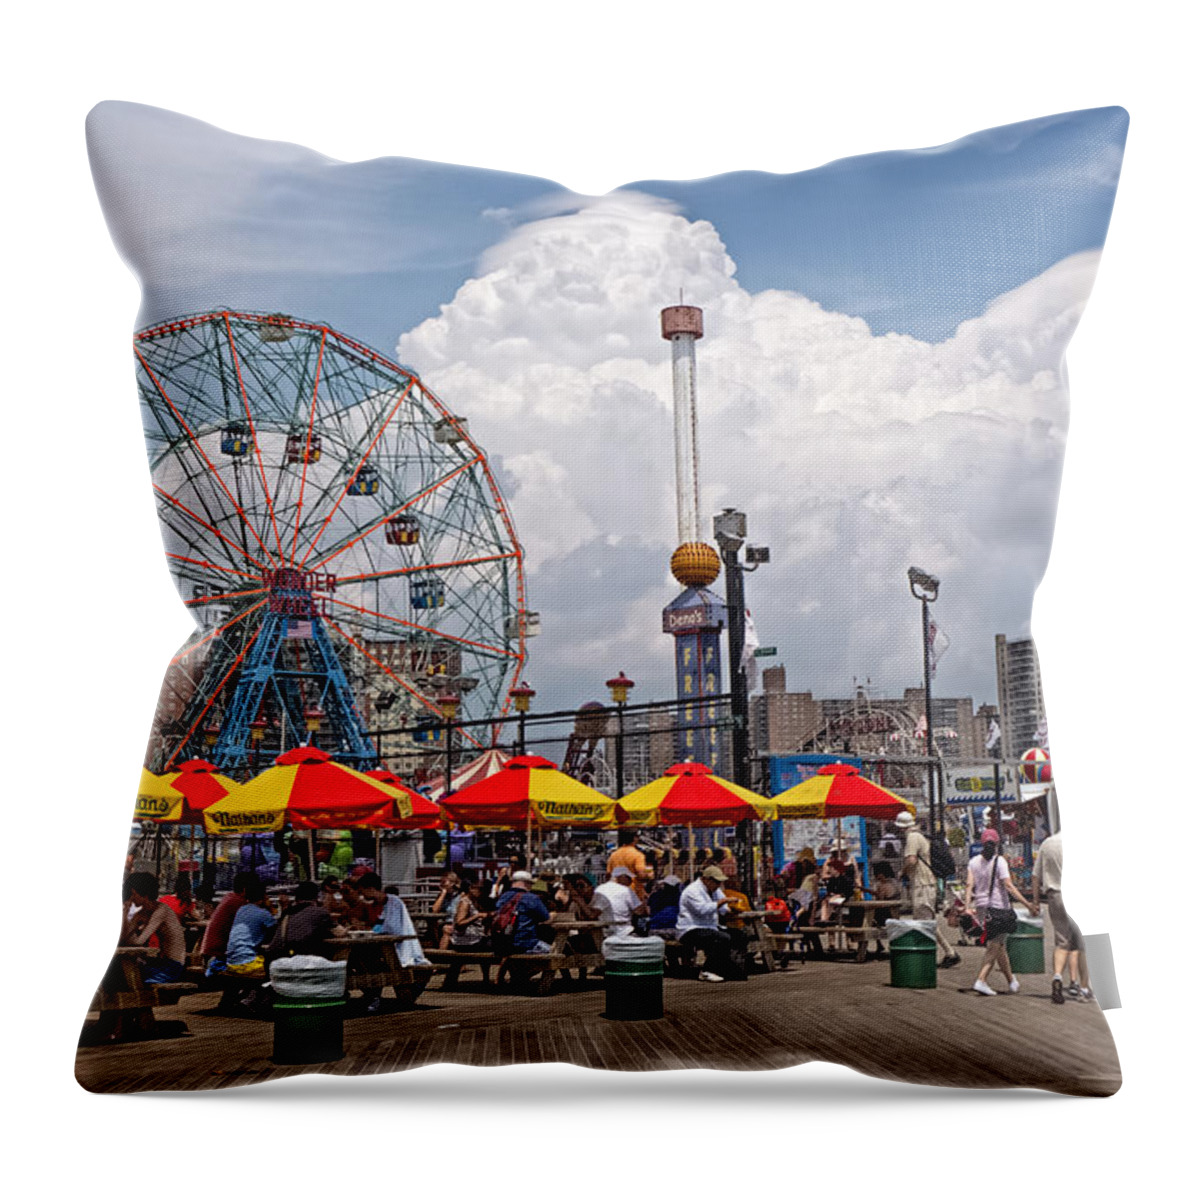 Amusement Park Throw Pillow featuring the photograph Coney Island June 2013 by Frank Winters